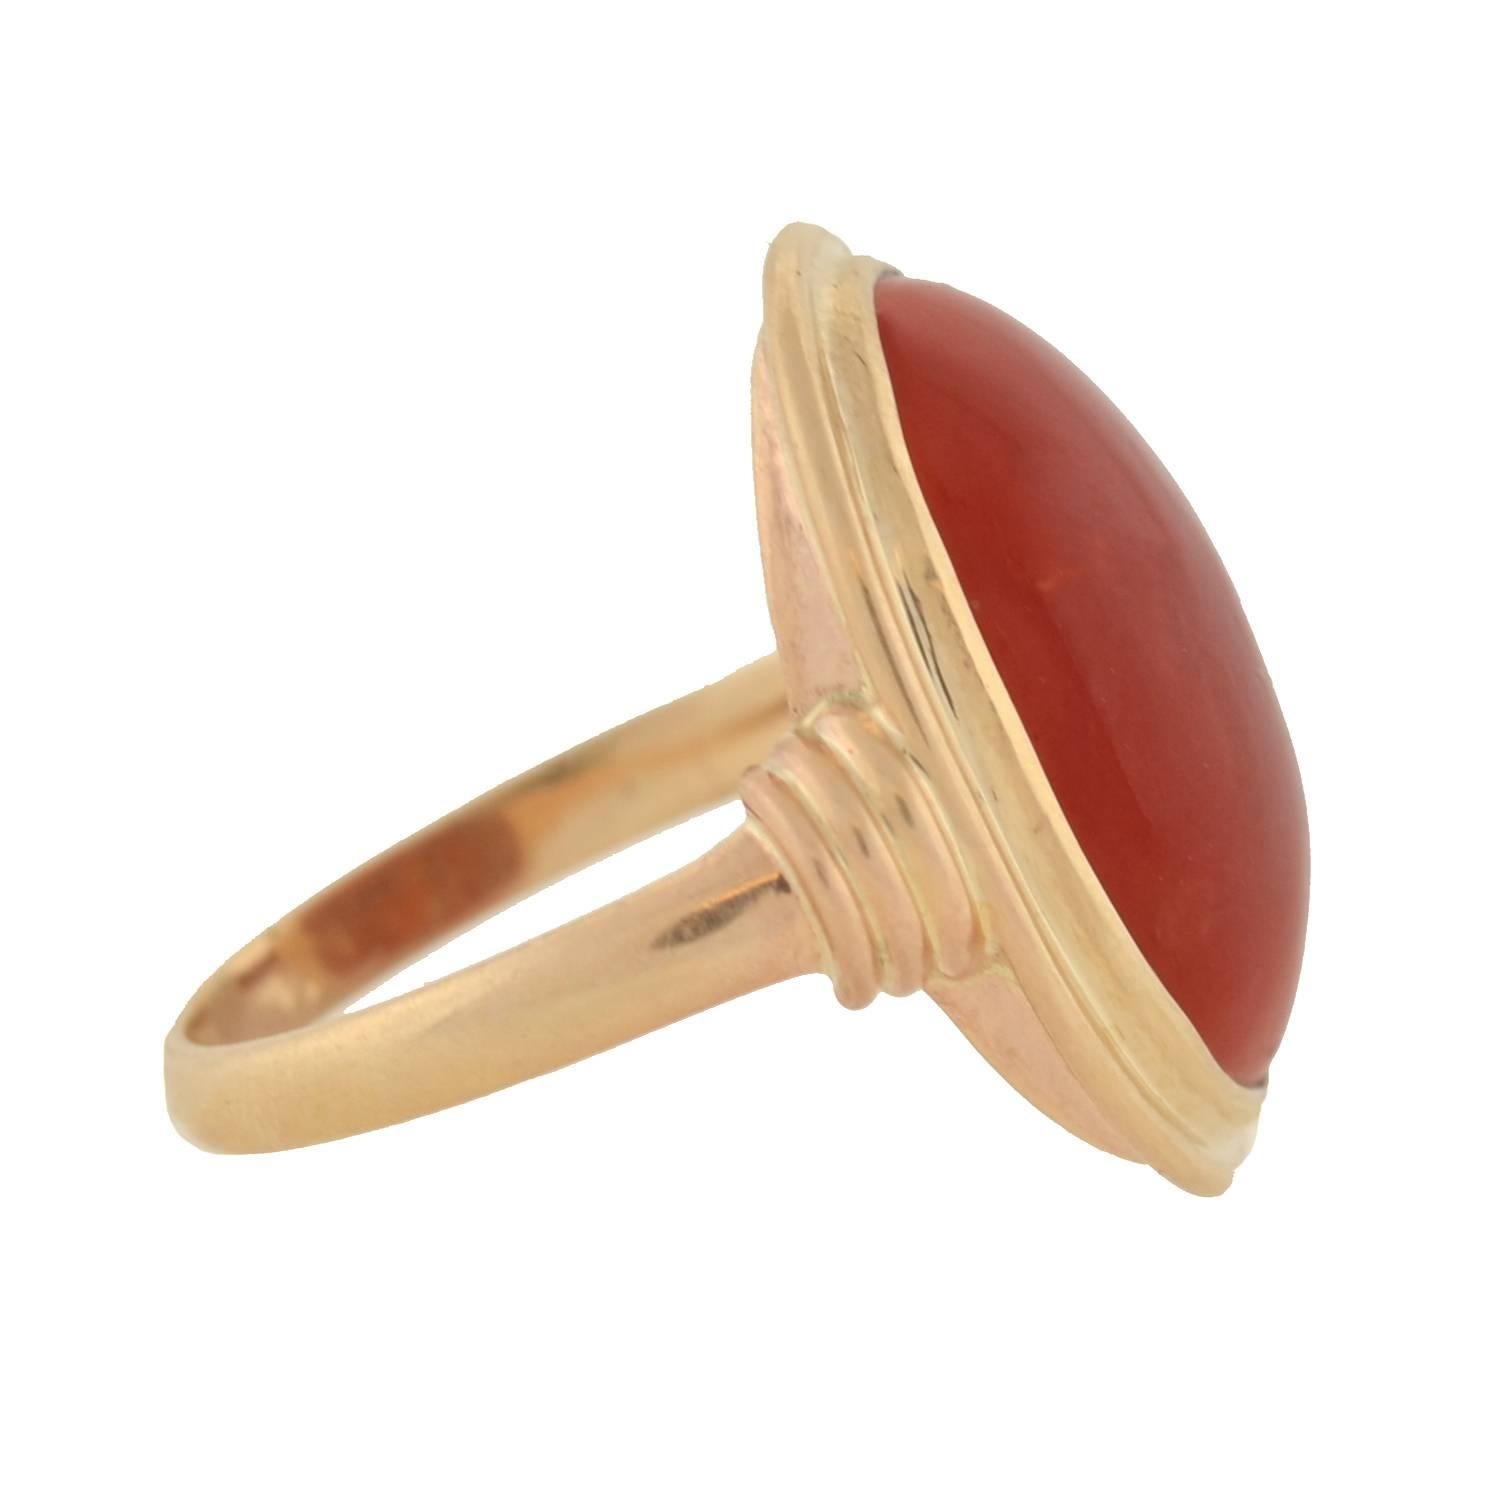 A simply beautiful natural coral ring from the early Retro (ca1930) era! Set in the center of this striking piece is a single large oxblood coral stone, which is bezel set in 14kt yellow gold. The coral rests within an oval shaped beveled frame